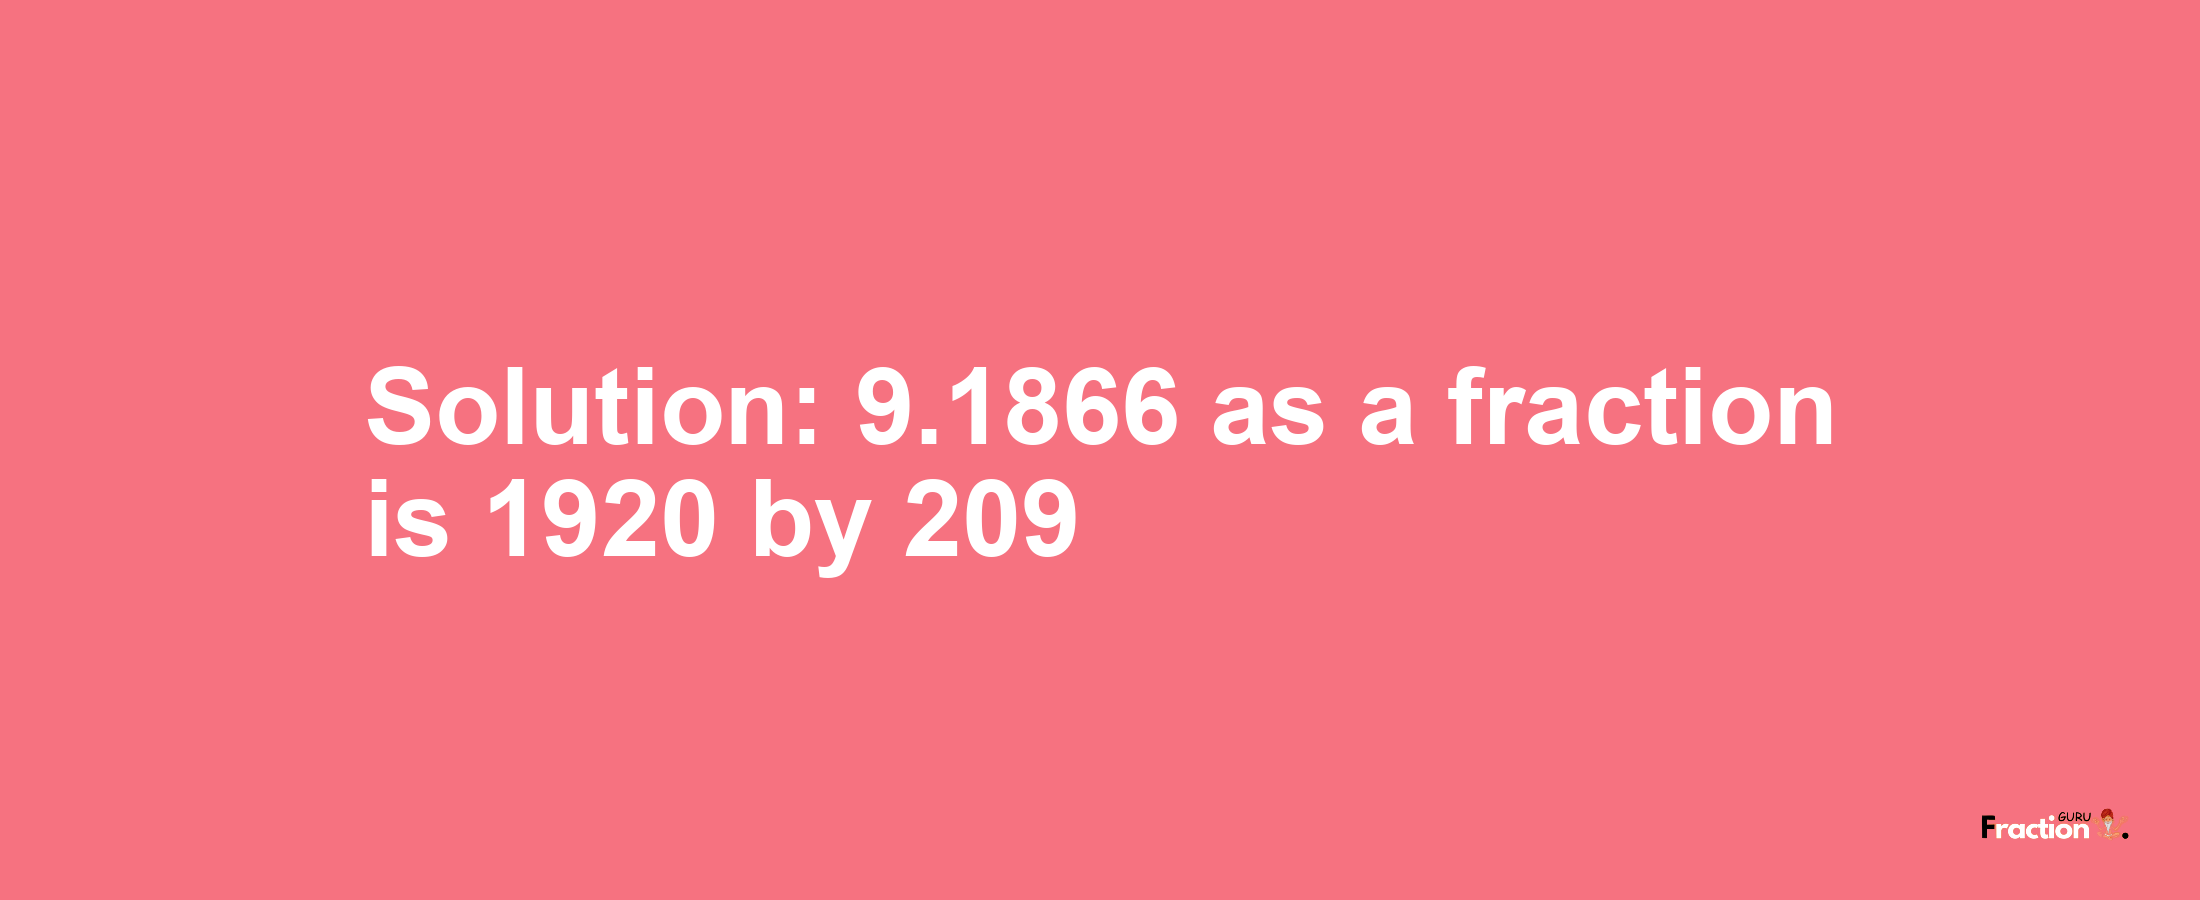 Solution:9.1866 as a fraction is 1920/209